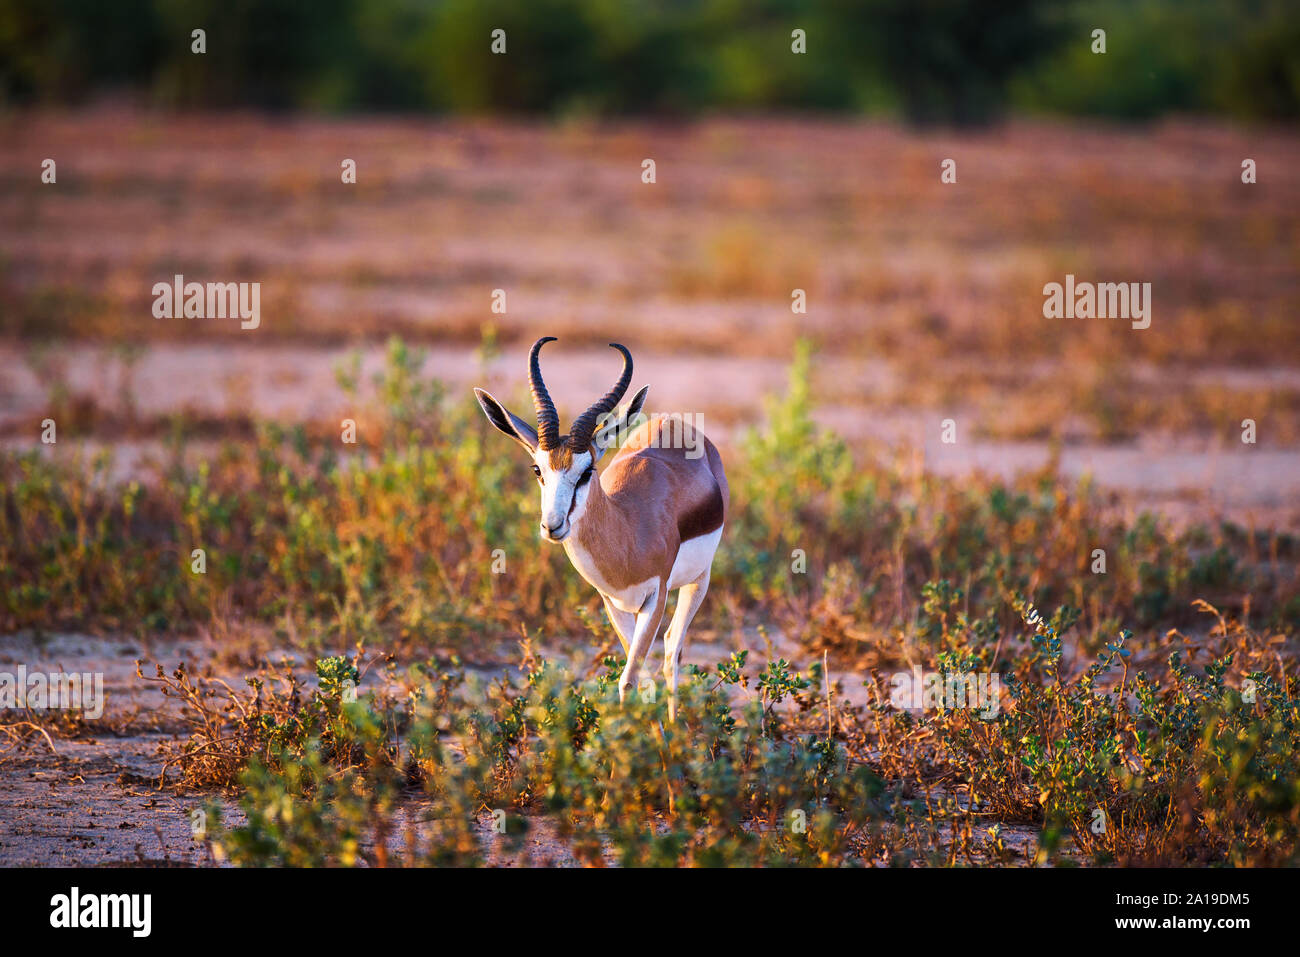 Springbok antelope photographed at sunset in Namibia Stock Photo